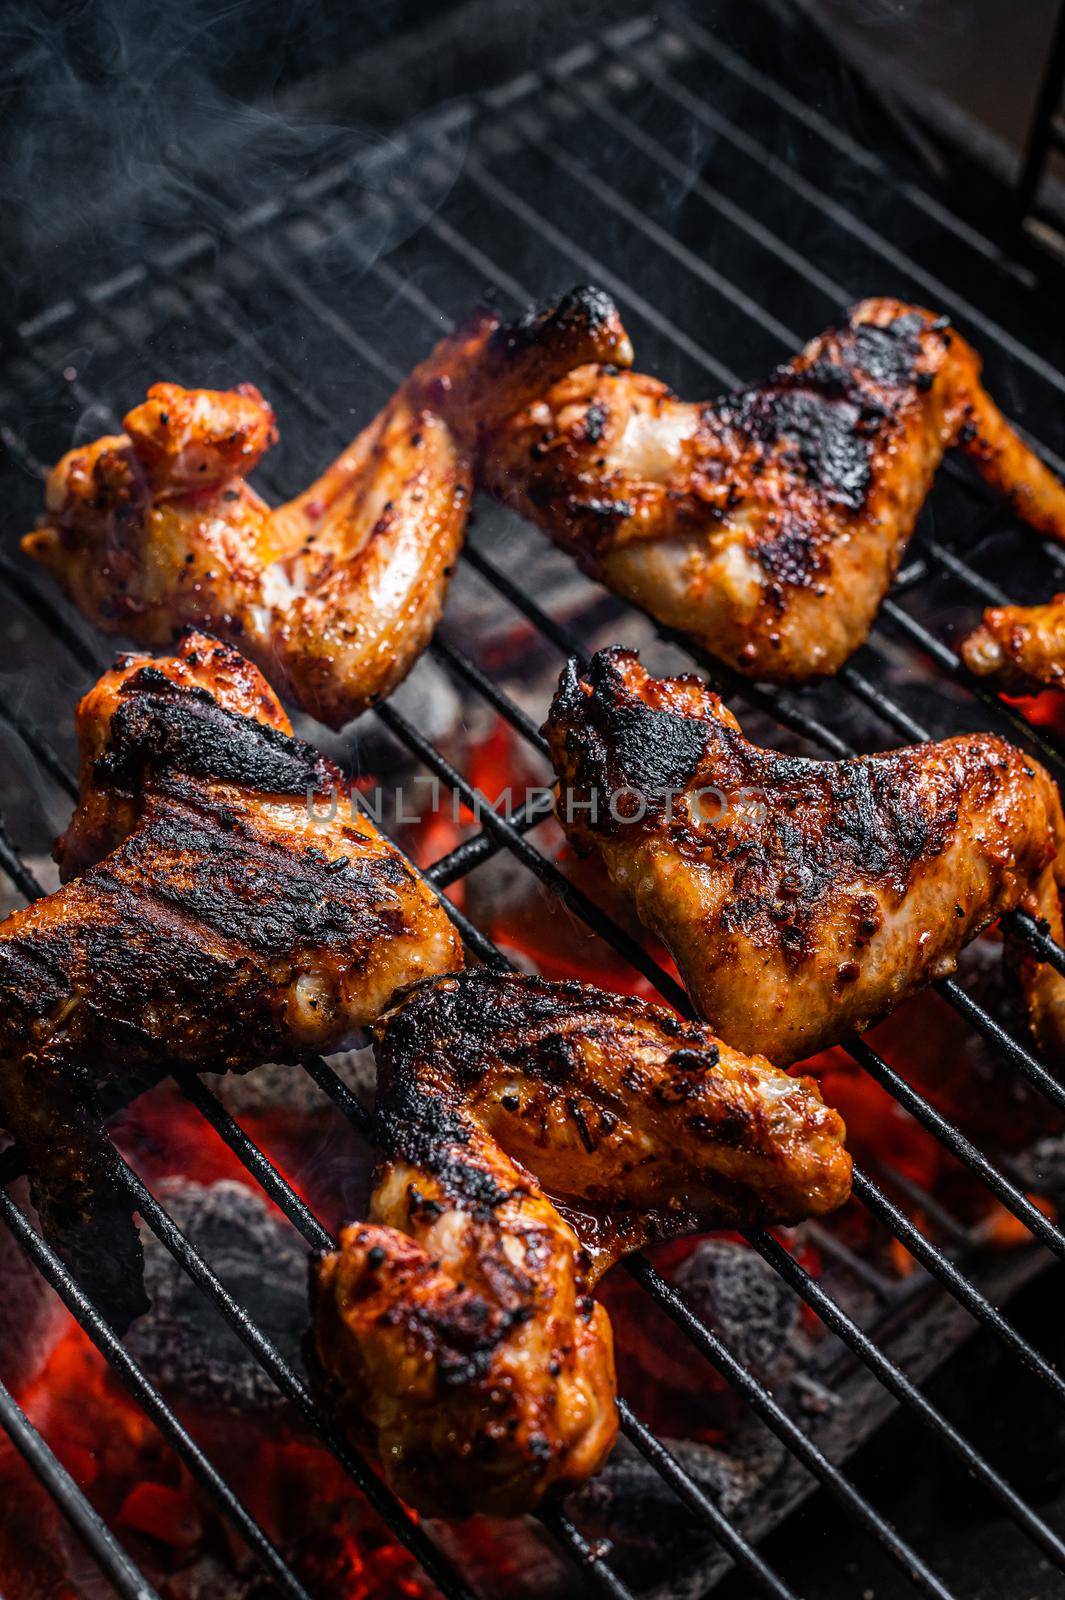 Chicken wings on barbecue, outdoor BBQ grill with fire. Top view.